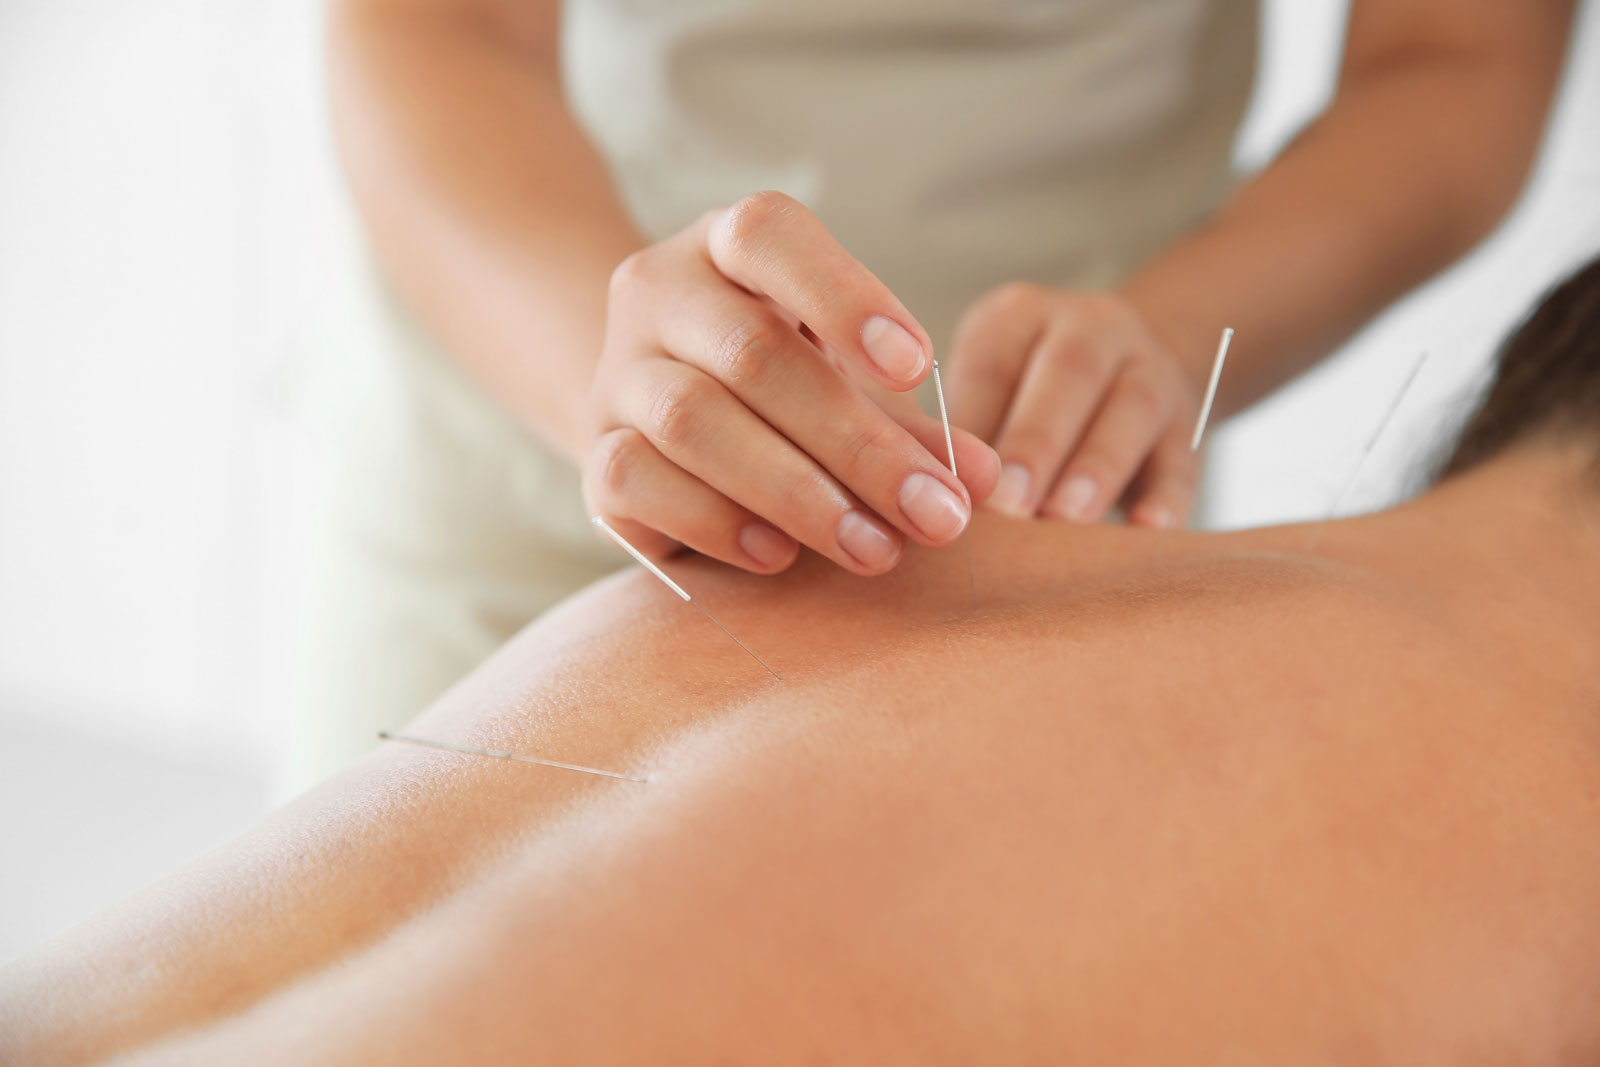 Acupuncture is one of the ICBC physiotherapy treatments